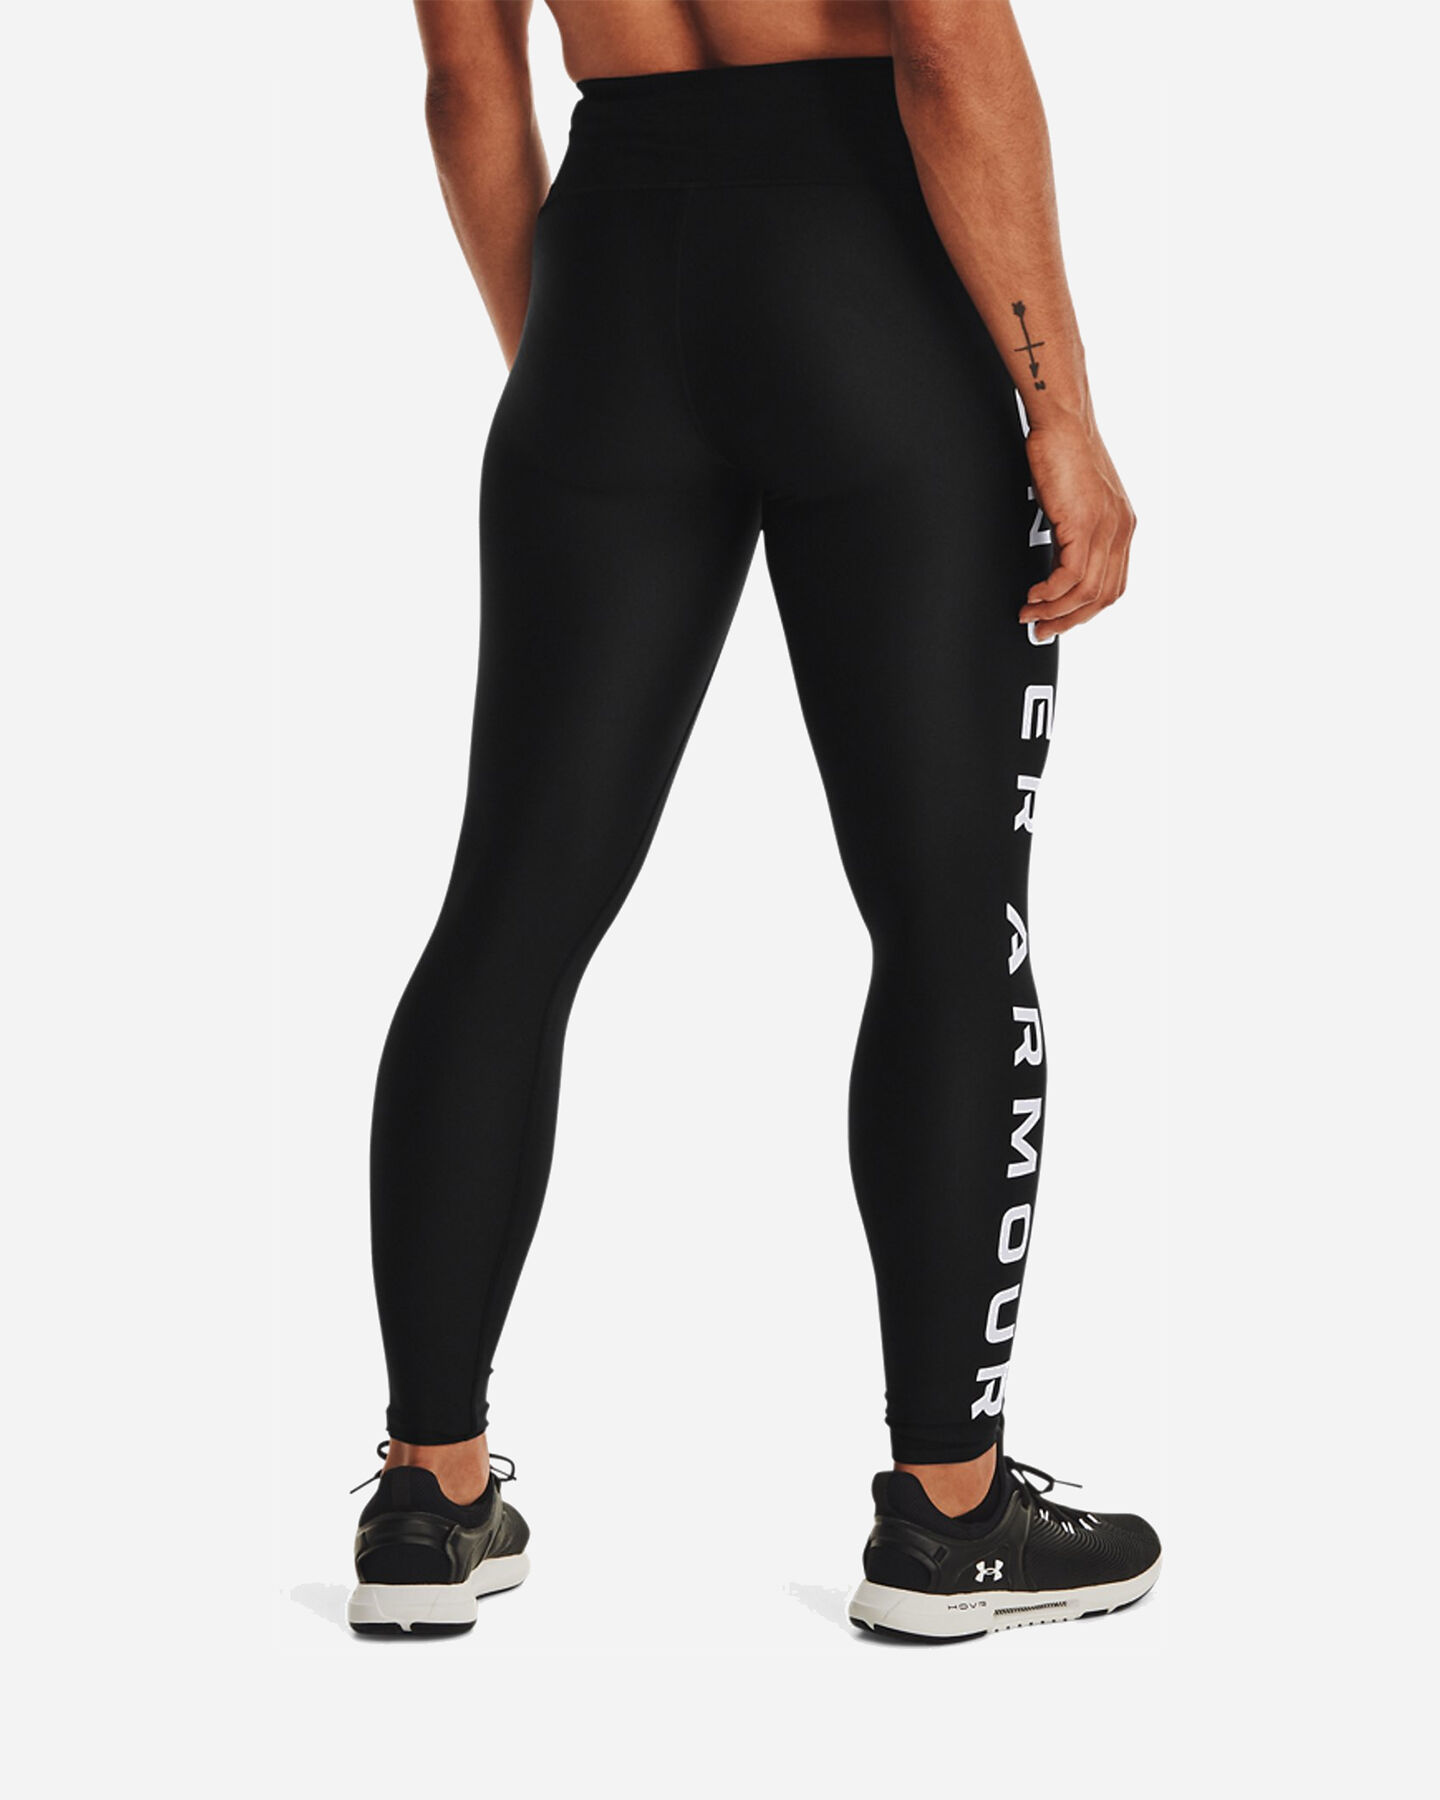  Leggings UNDER ARMOUR LATERAL LOGO W S5287029|0001|XS scatto 3